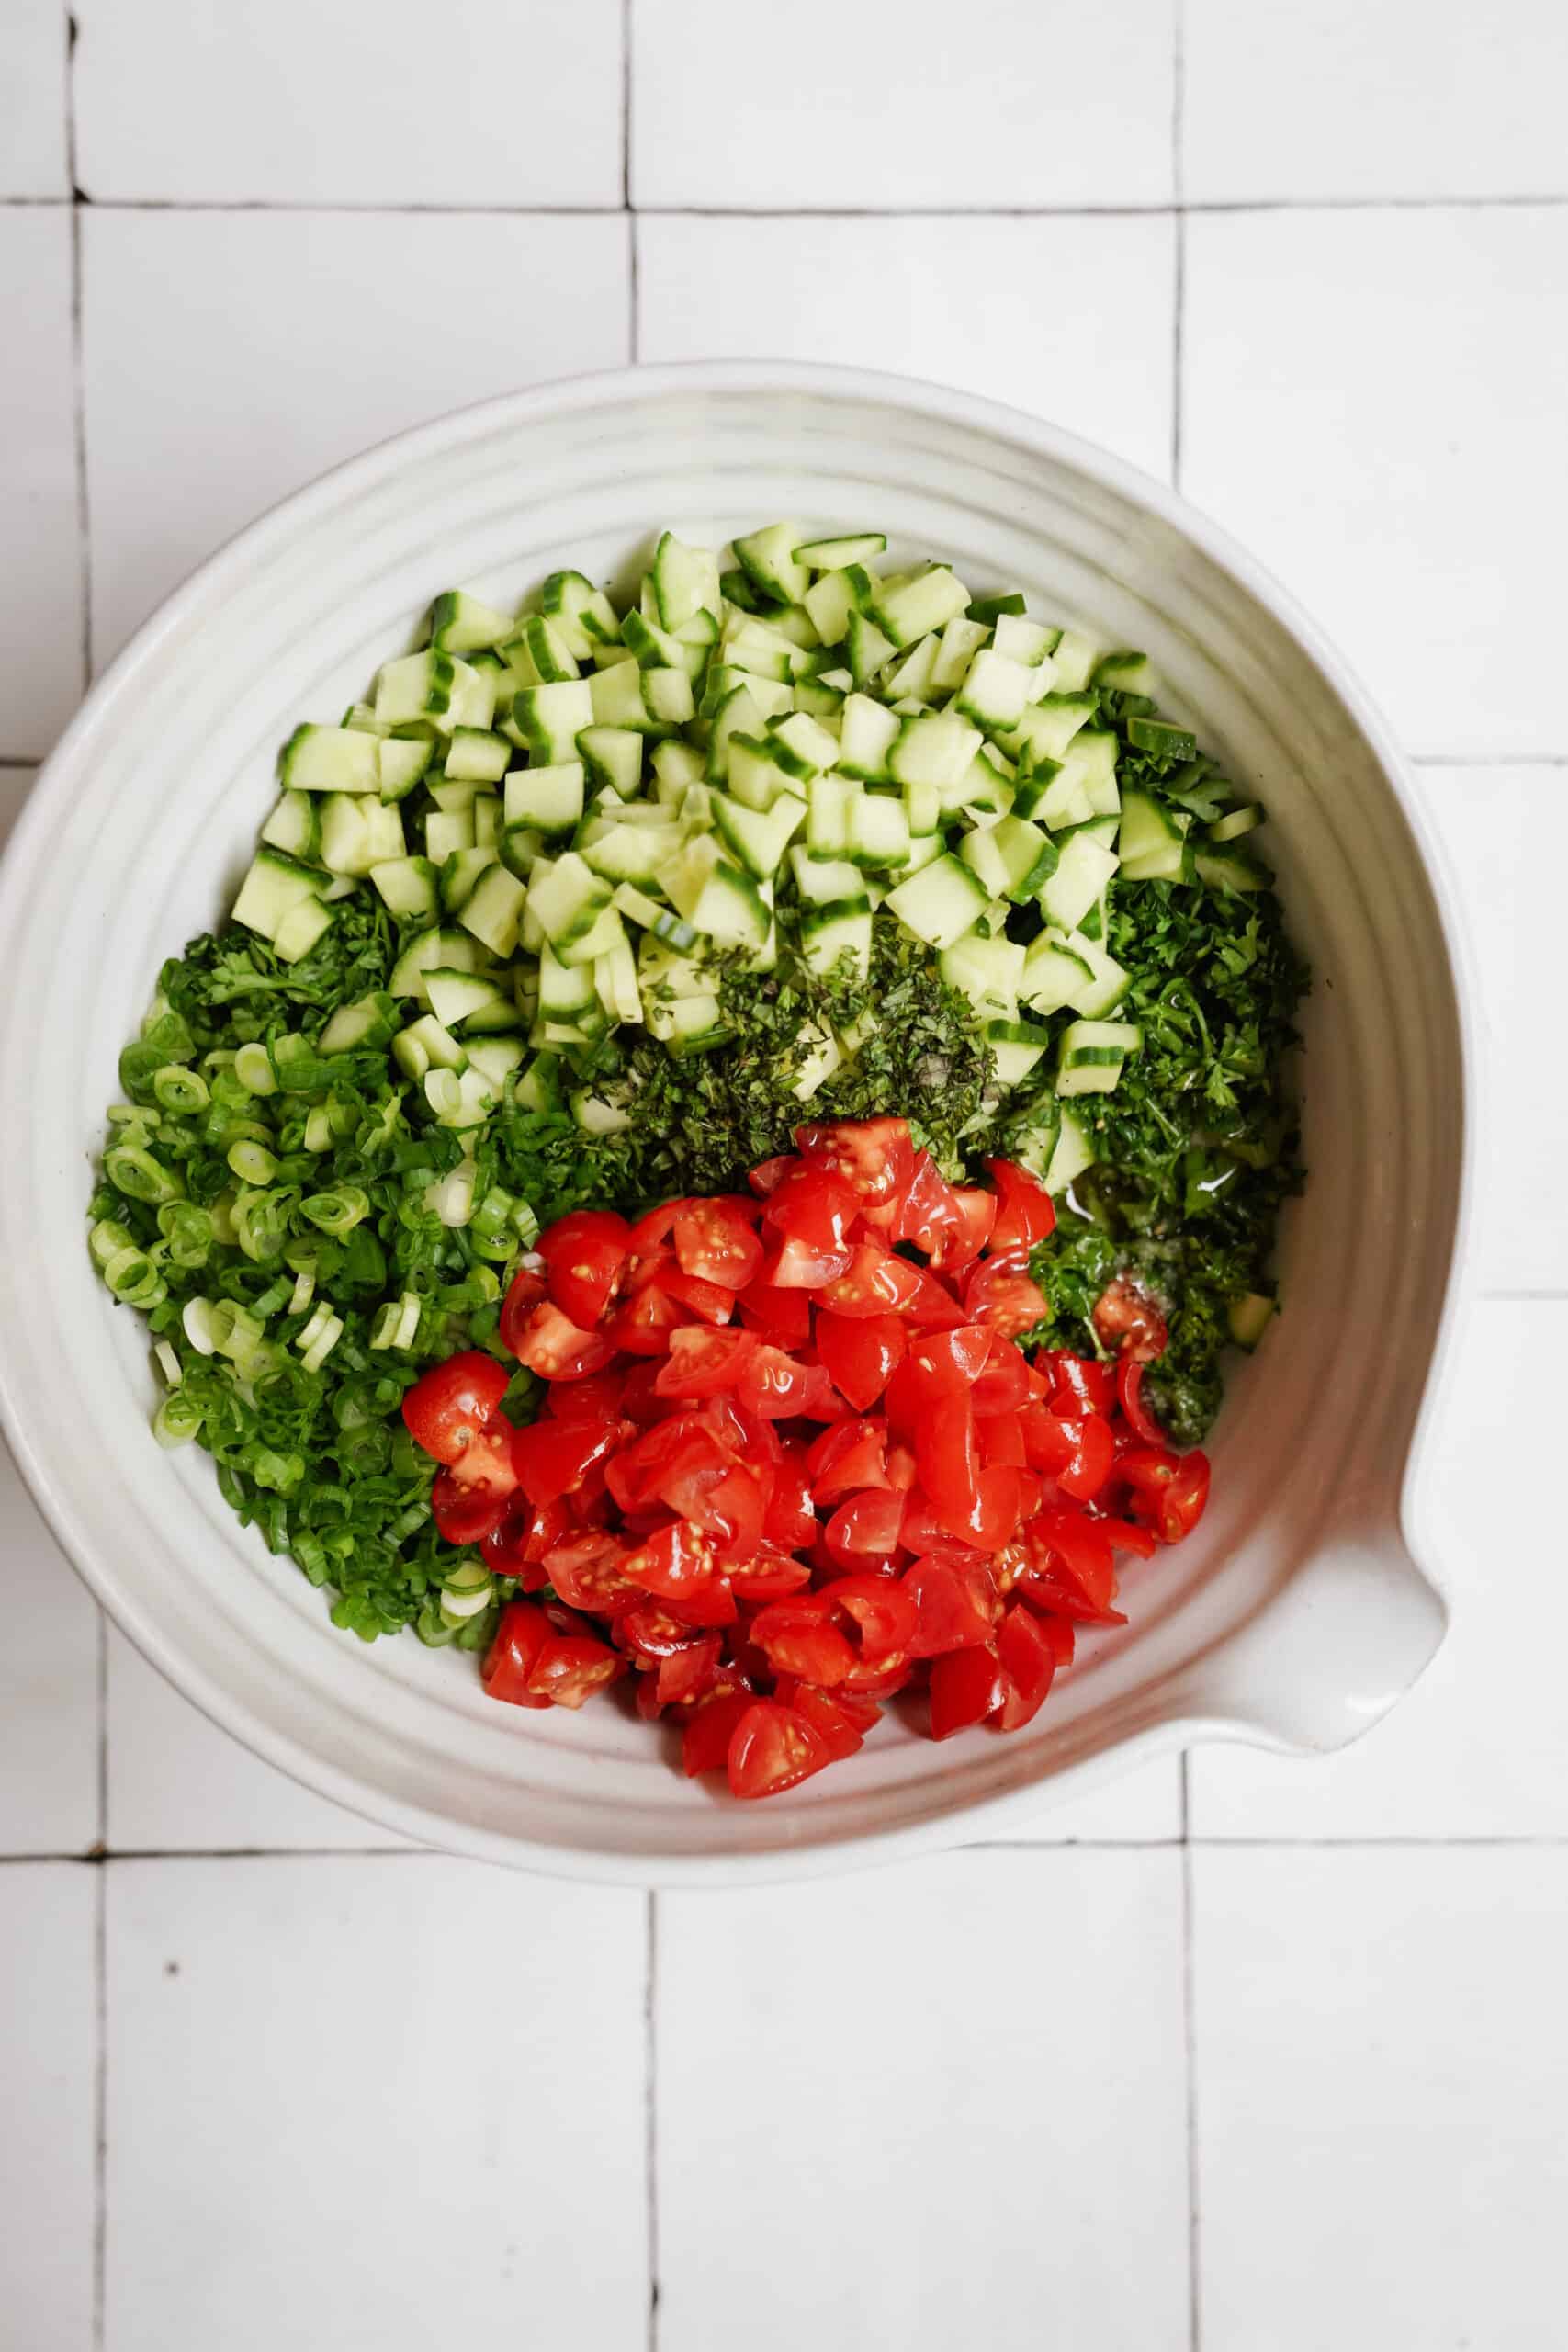 Ingredients for tabbouleh salad in a bowl